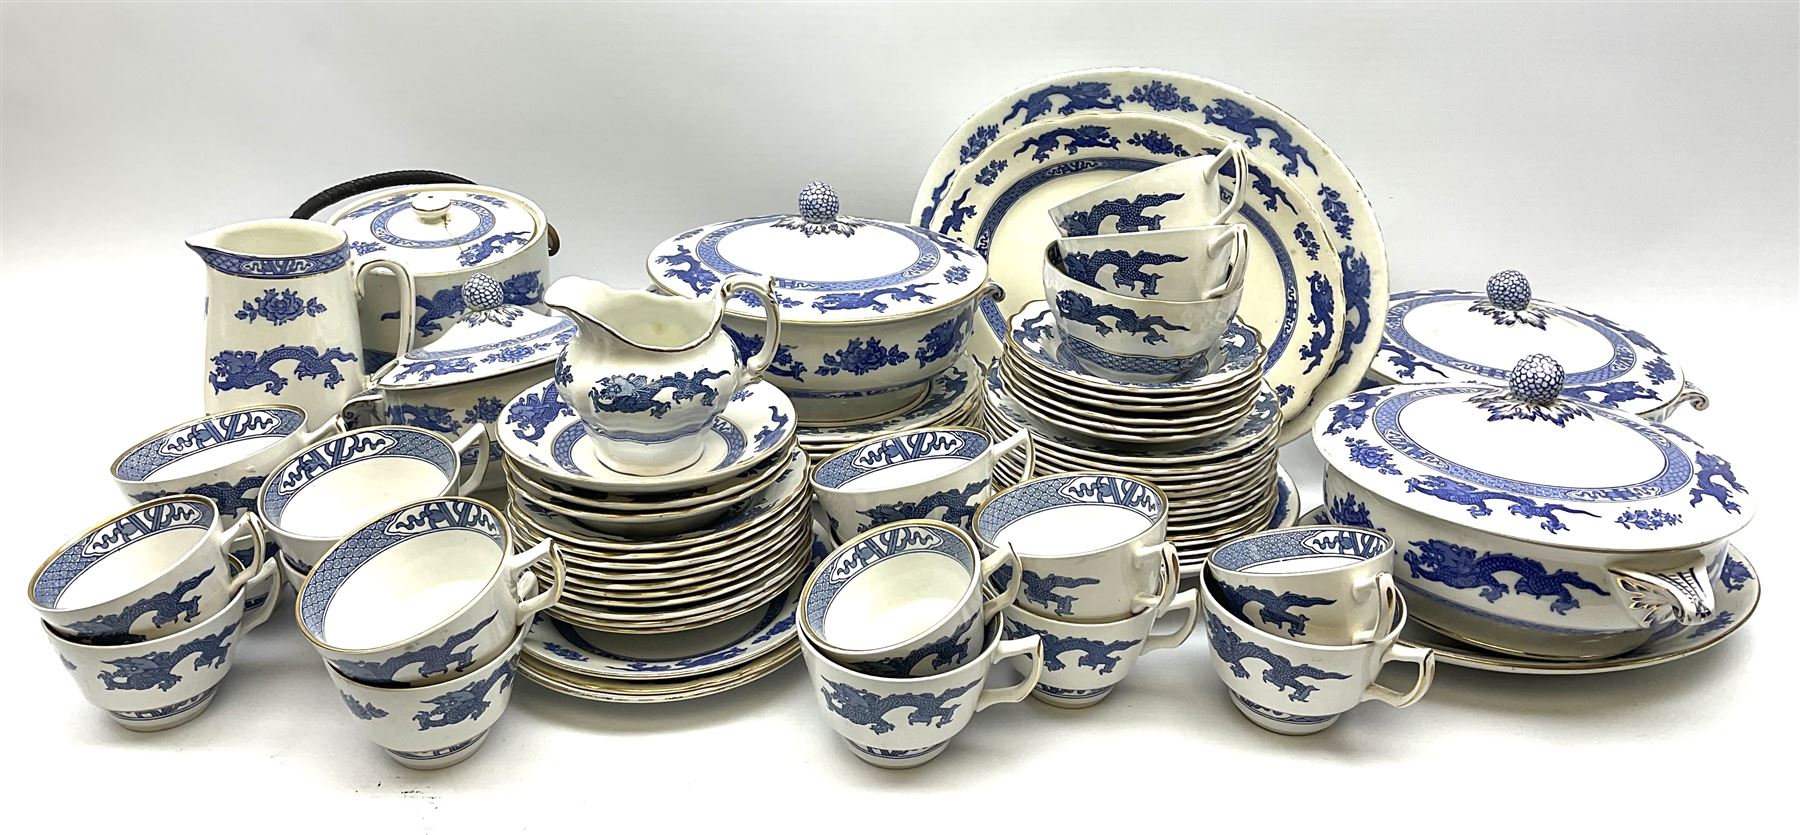 Booths and Cauldon matched tea and dinner wares decorated with blue dragons upon a plain ground heig